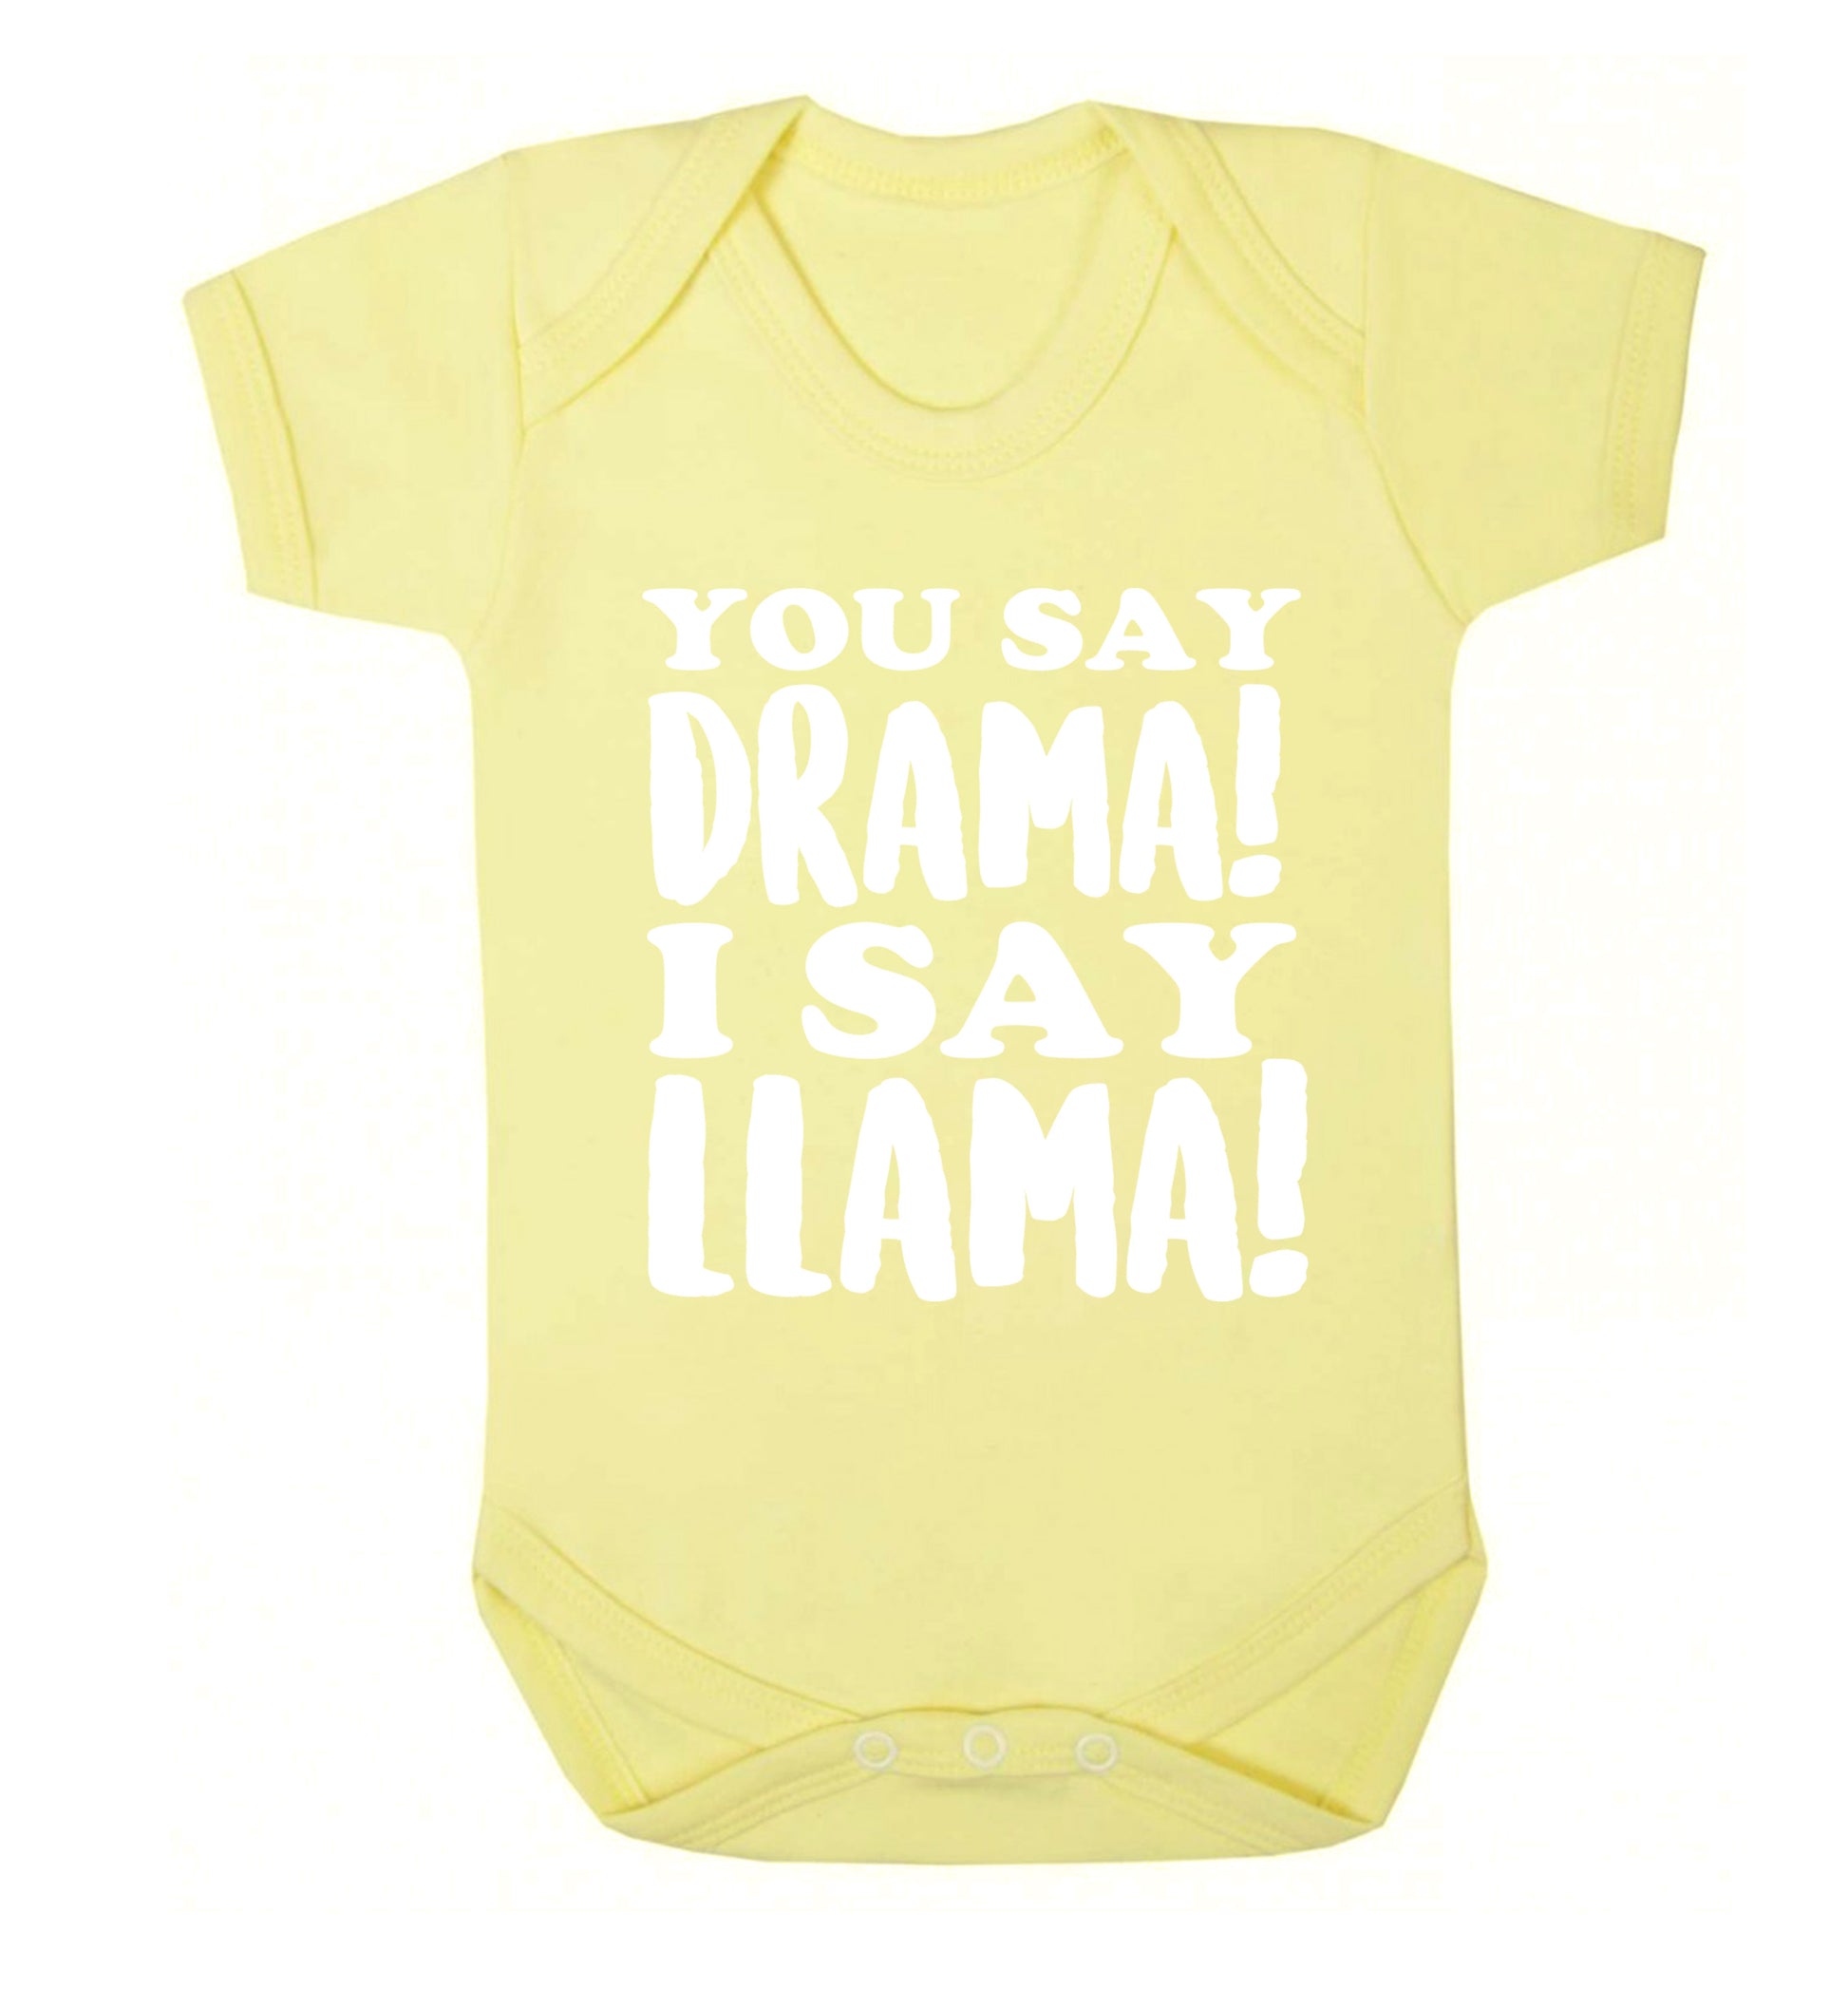 You say drama I say llama! Baby Vest pale yellow 18-24 months